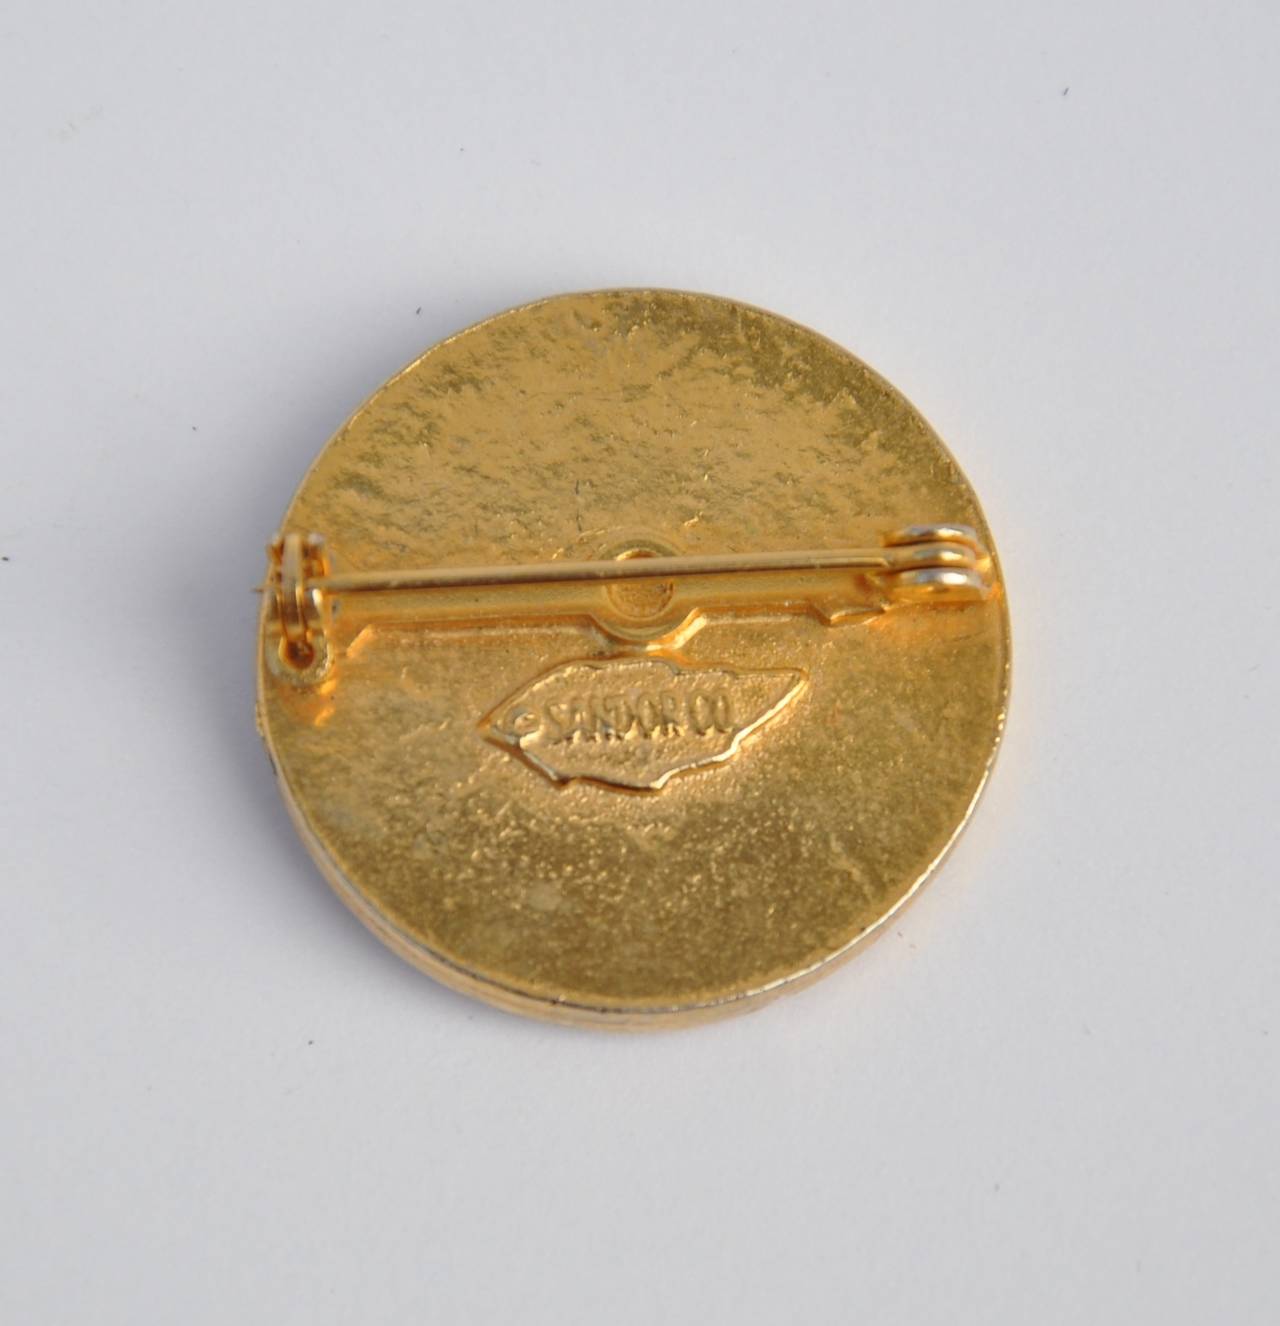 Sandor & Co. gilded gold accented with enamel "button" brooch measures 1 1/8" in circumference, with a depth of 1/8". The brooch is signed on the backside.